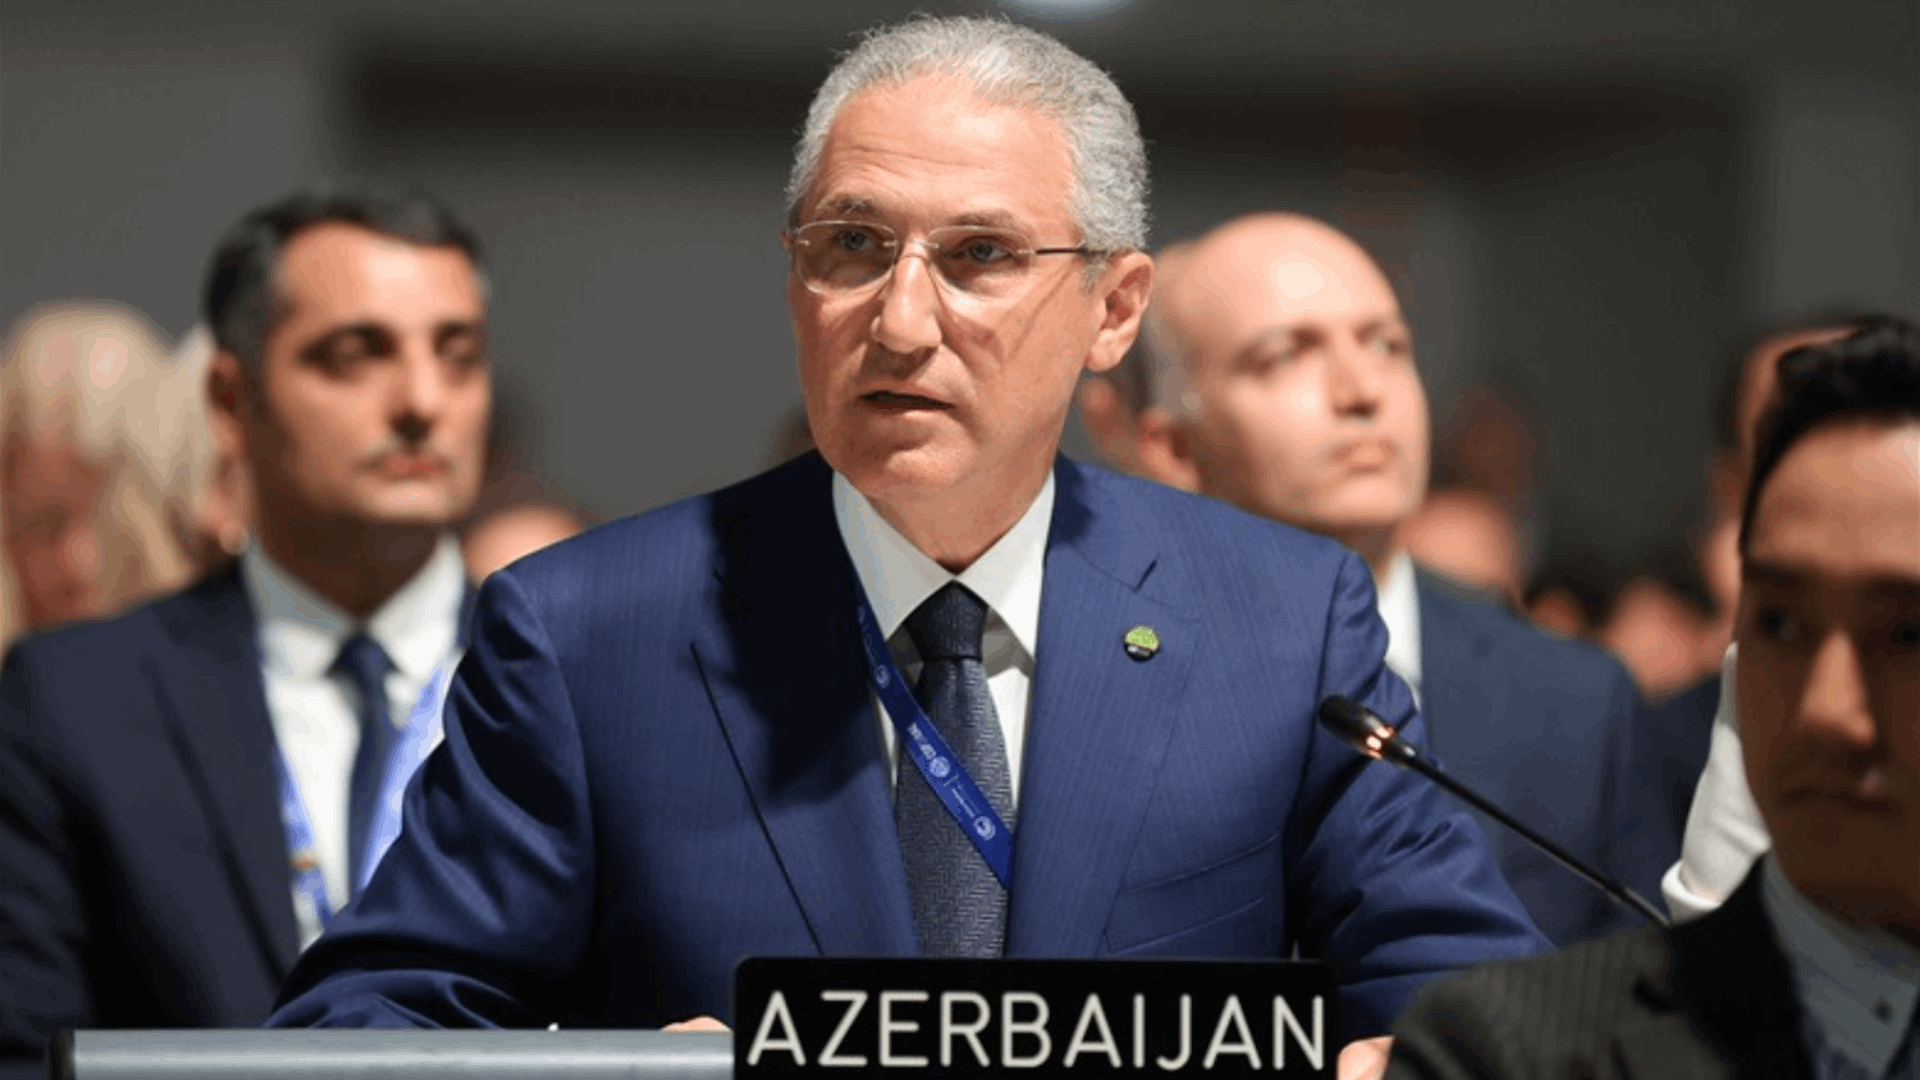 COP29 host Azerbaijan plans to upgrade climate target